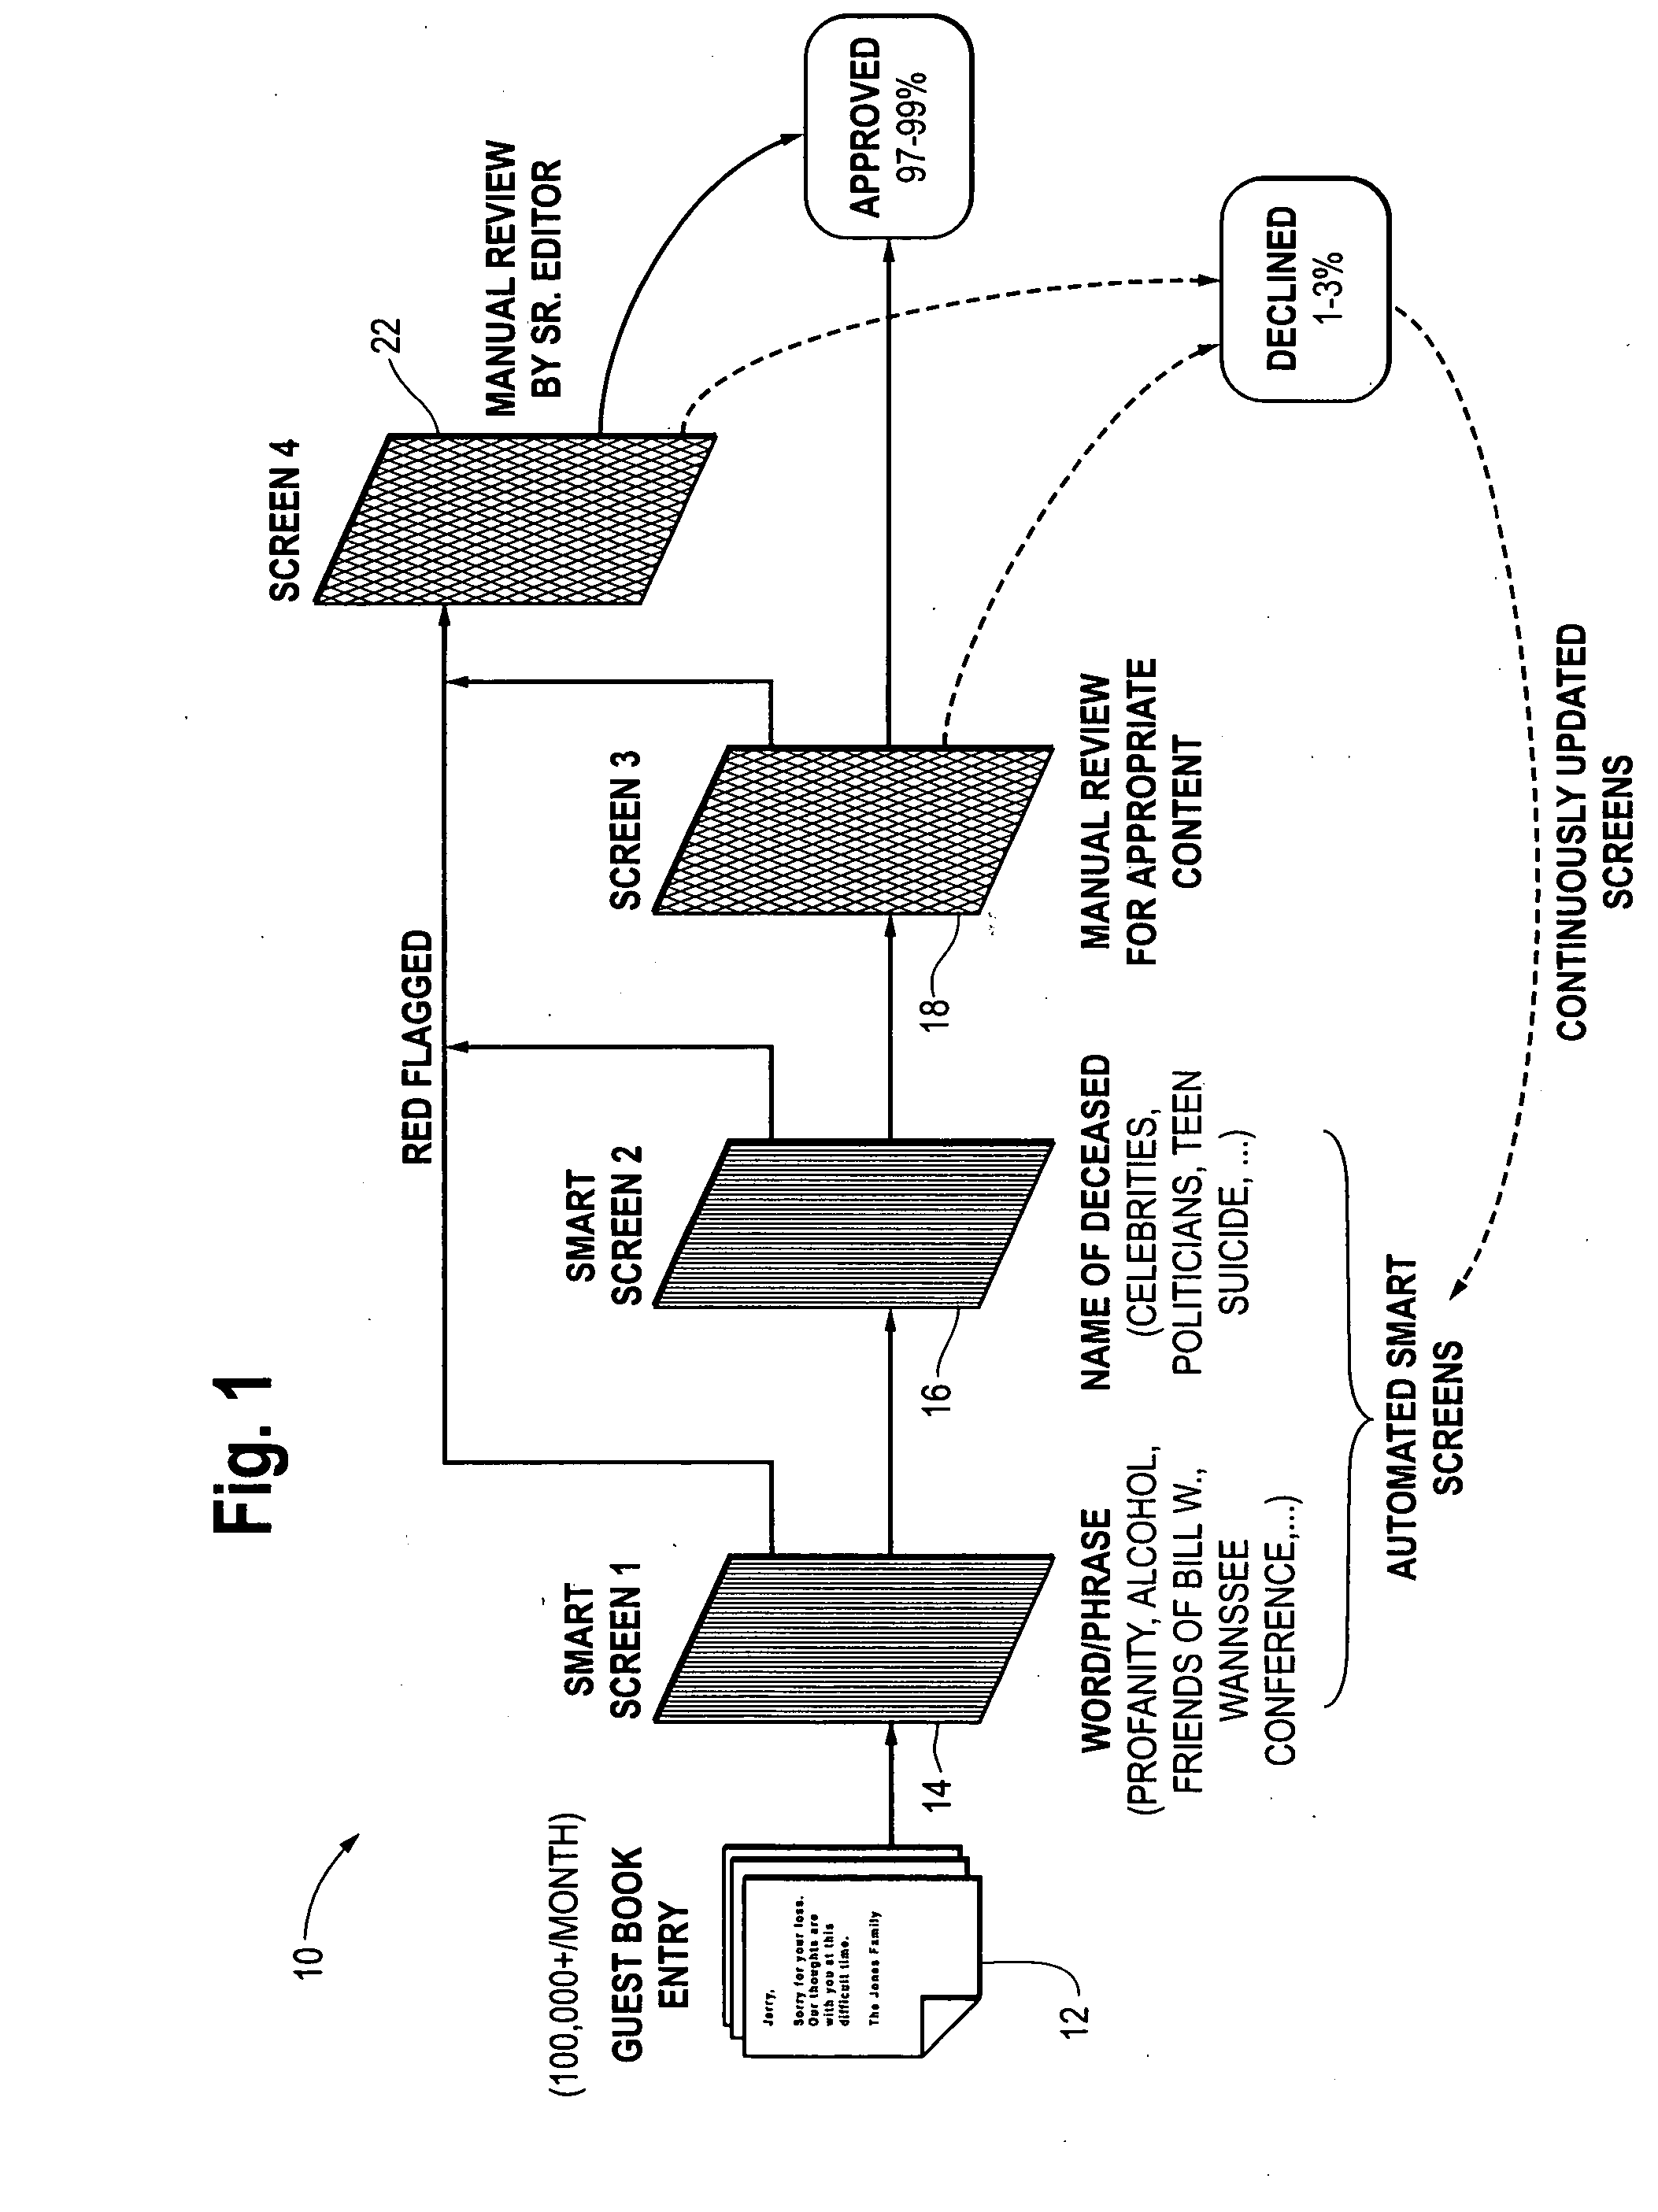 Systems and methods for enhancing the screening of electronic message data